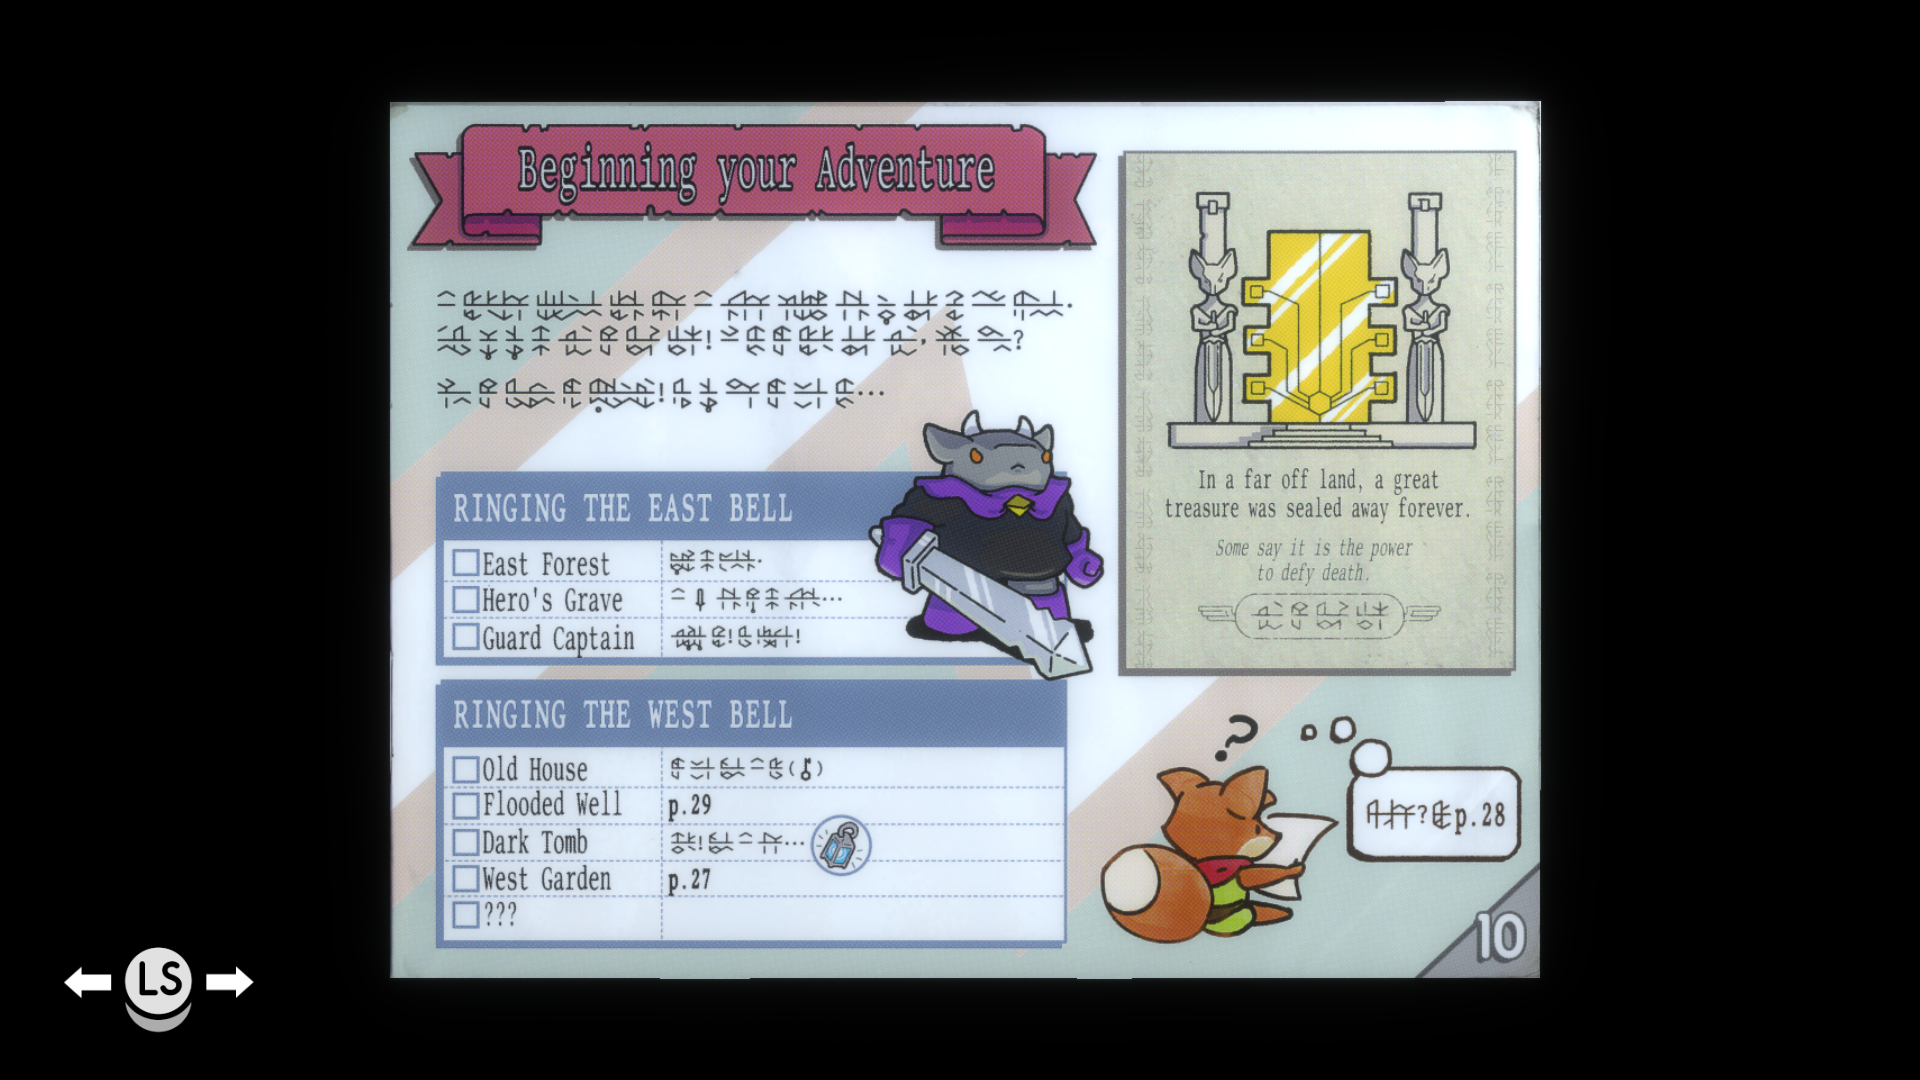 The main tutorial and journal screen, which is presented like a Super Nintendo game manual.